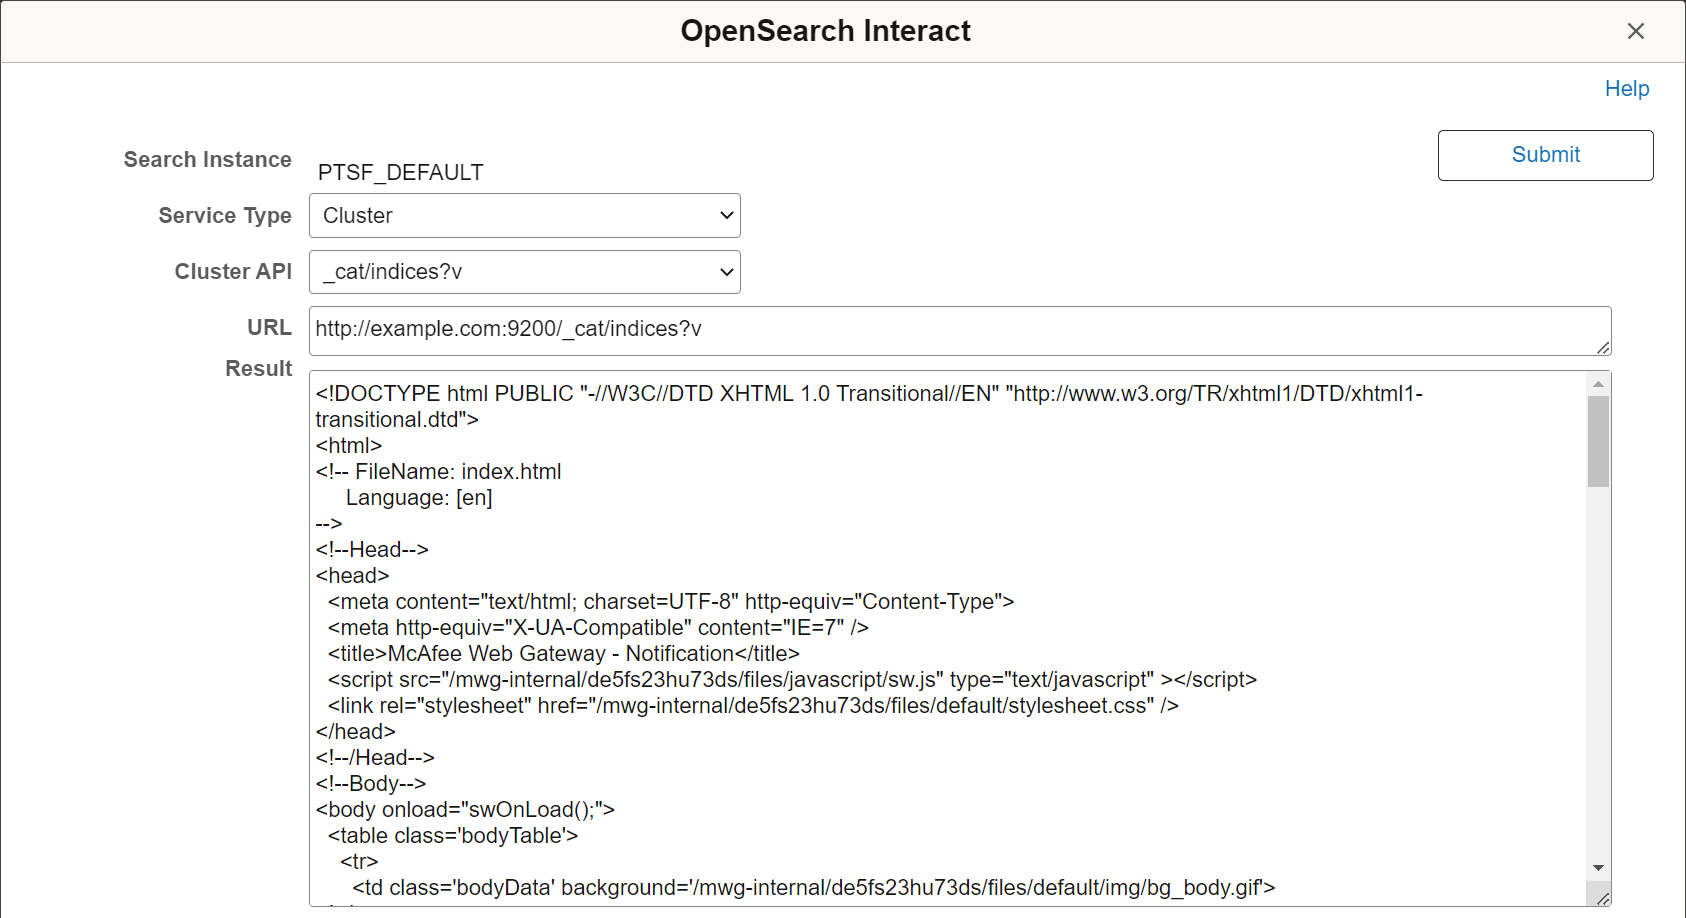 OpenSearch Interact page